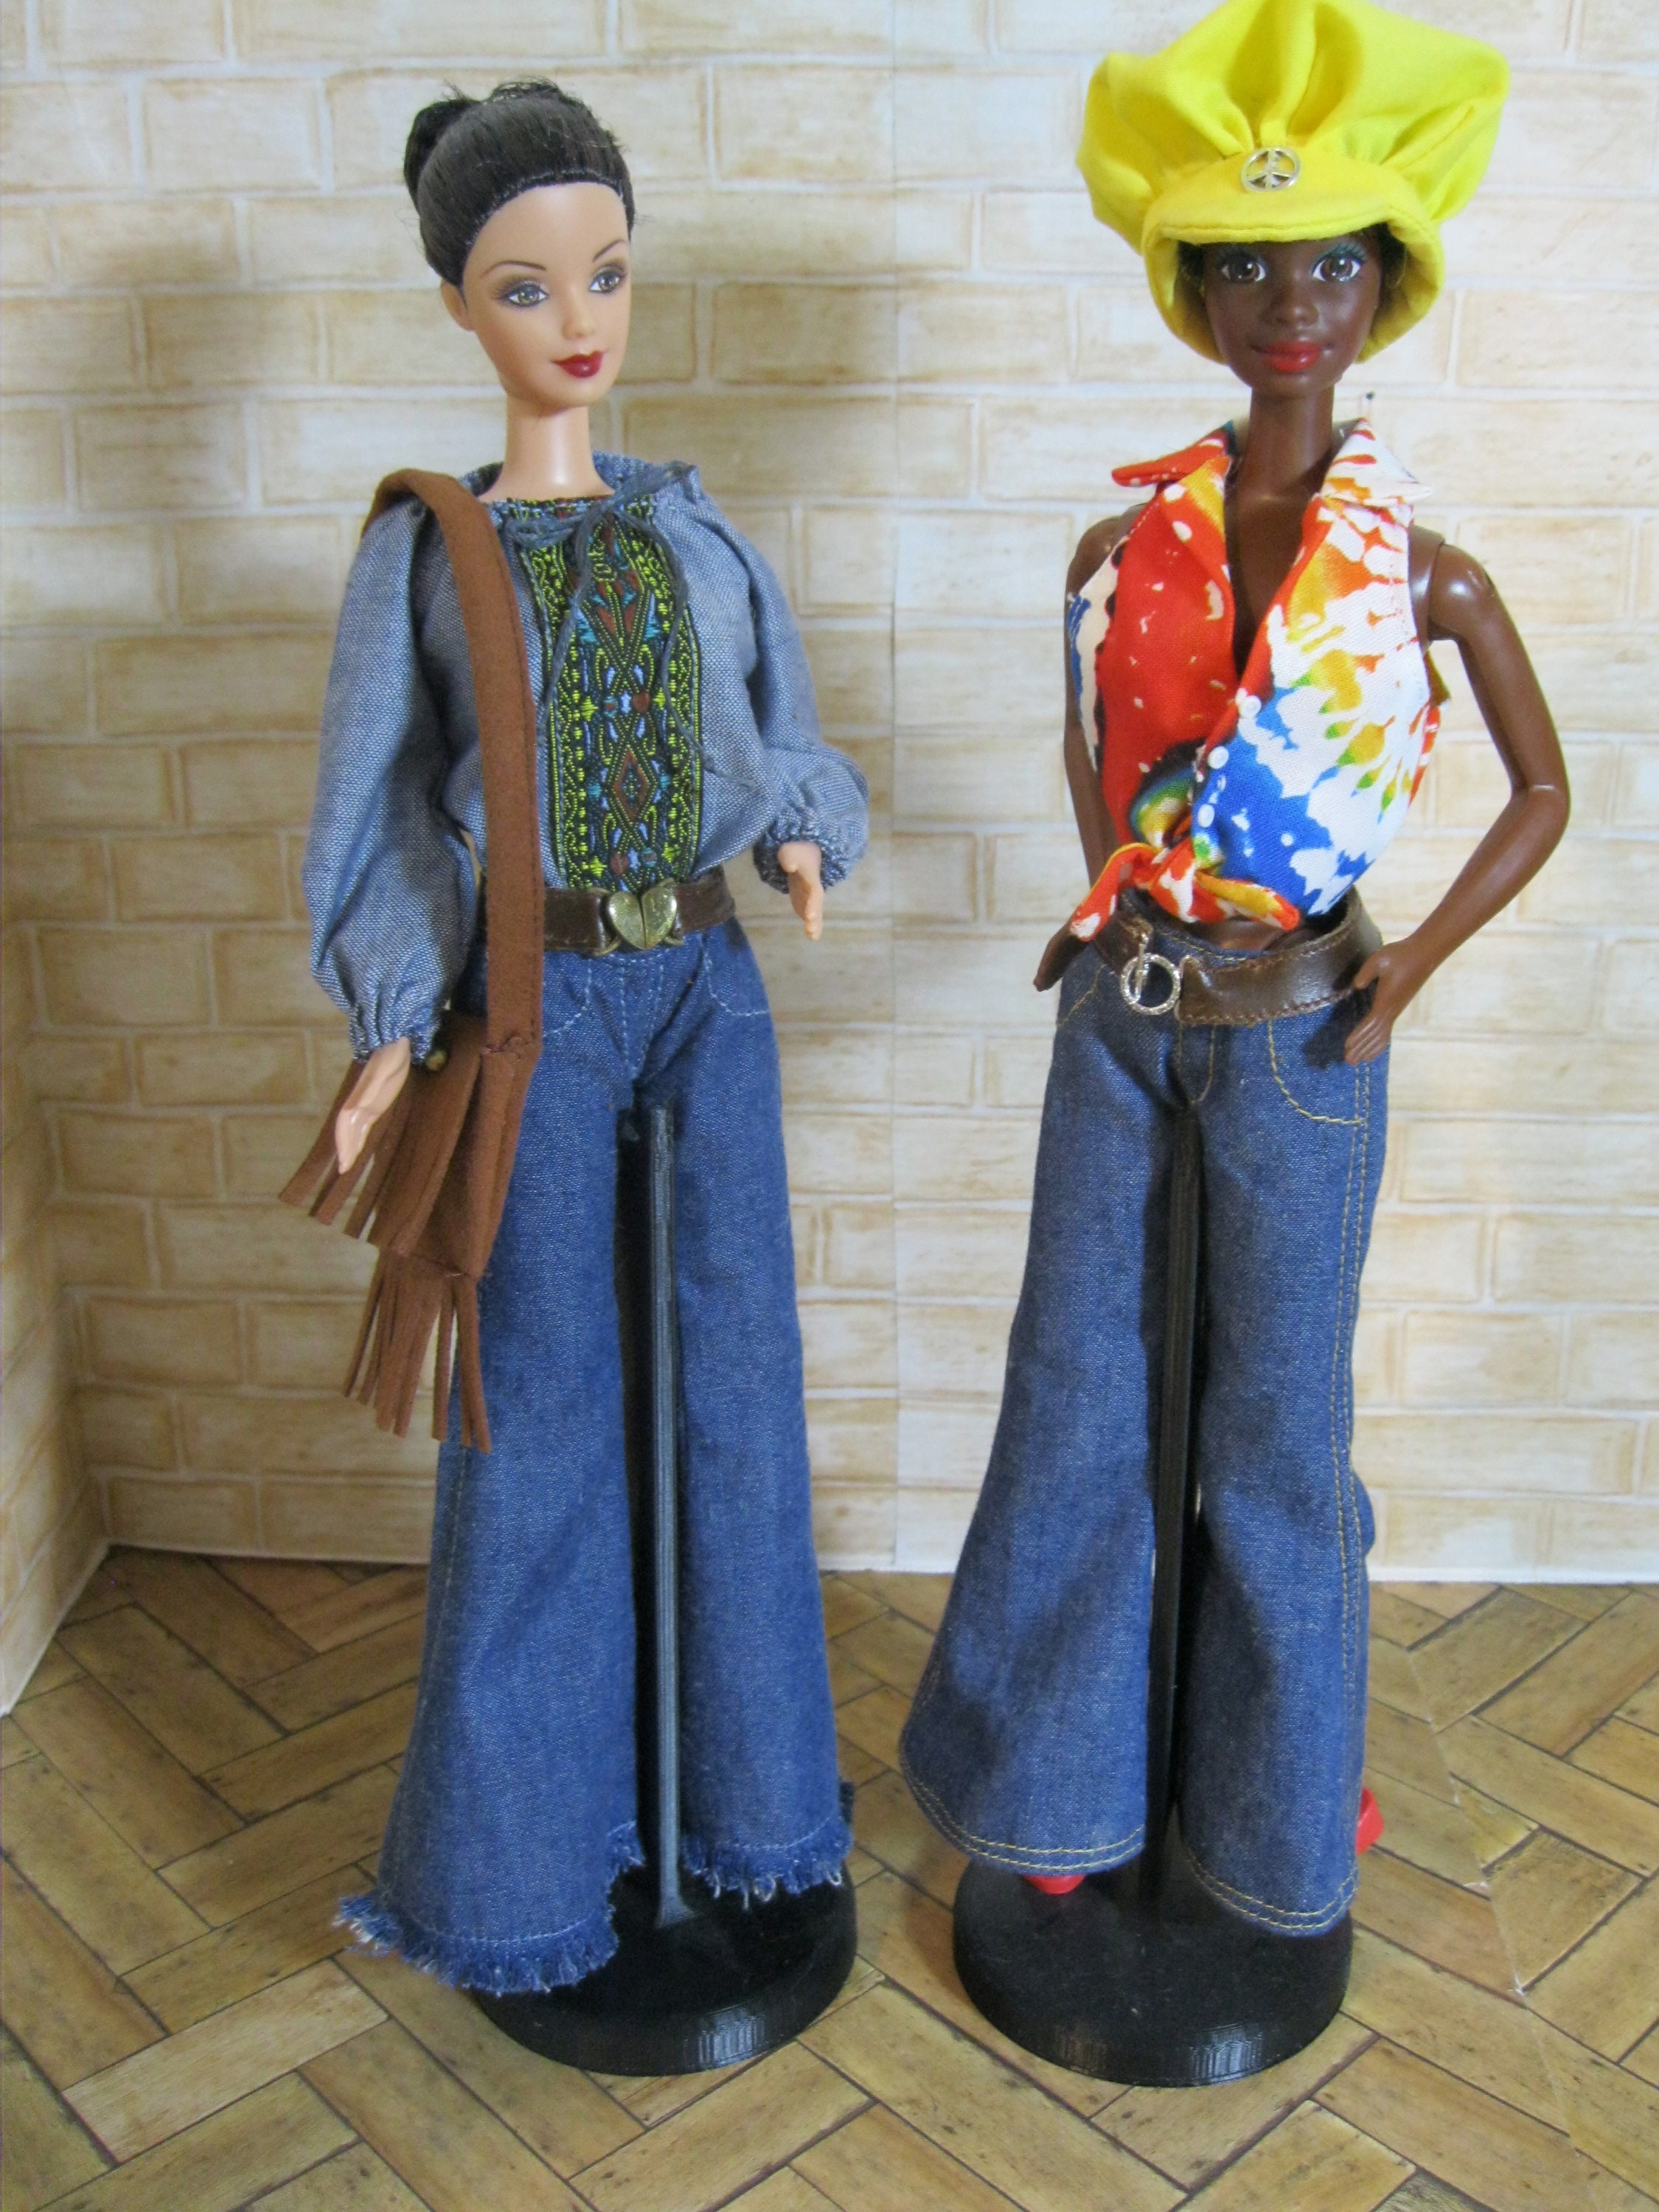 VTG 70s Bell Bottom Outfit Blue Pants Clothes Fits 11.5 Girl Fashion Doll  1:6